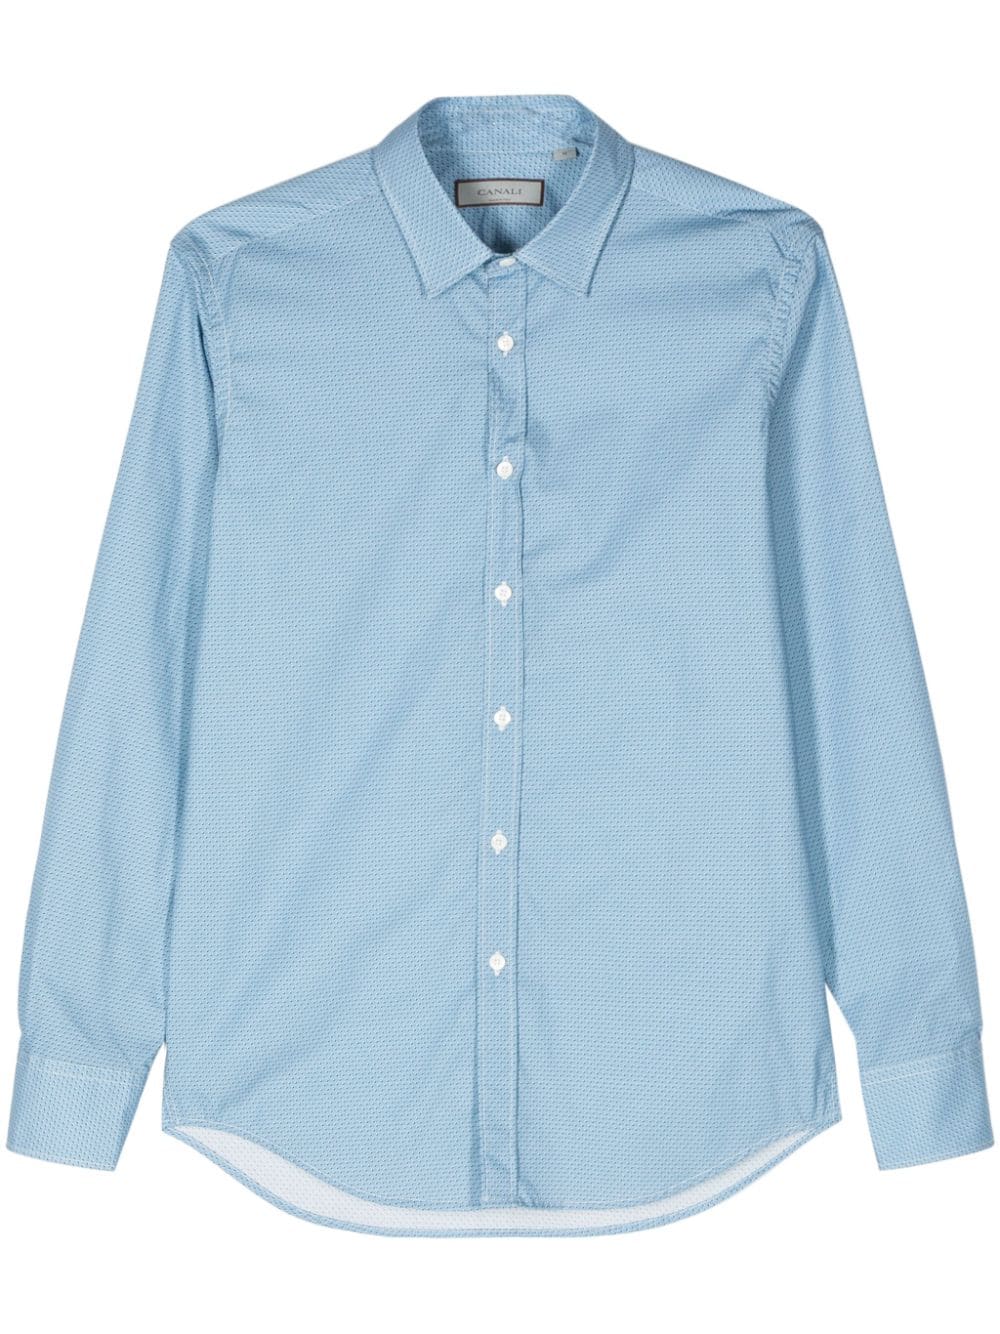 Canali micro-patterned cotton shirt - Blue von Canali